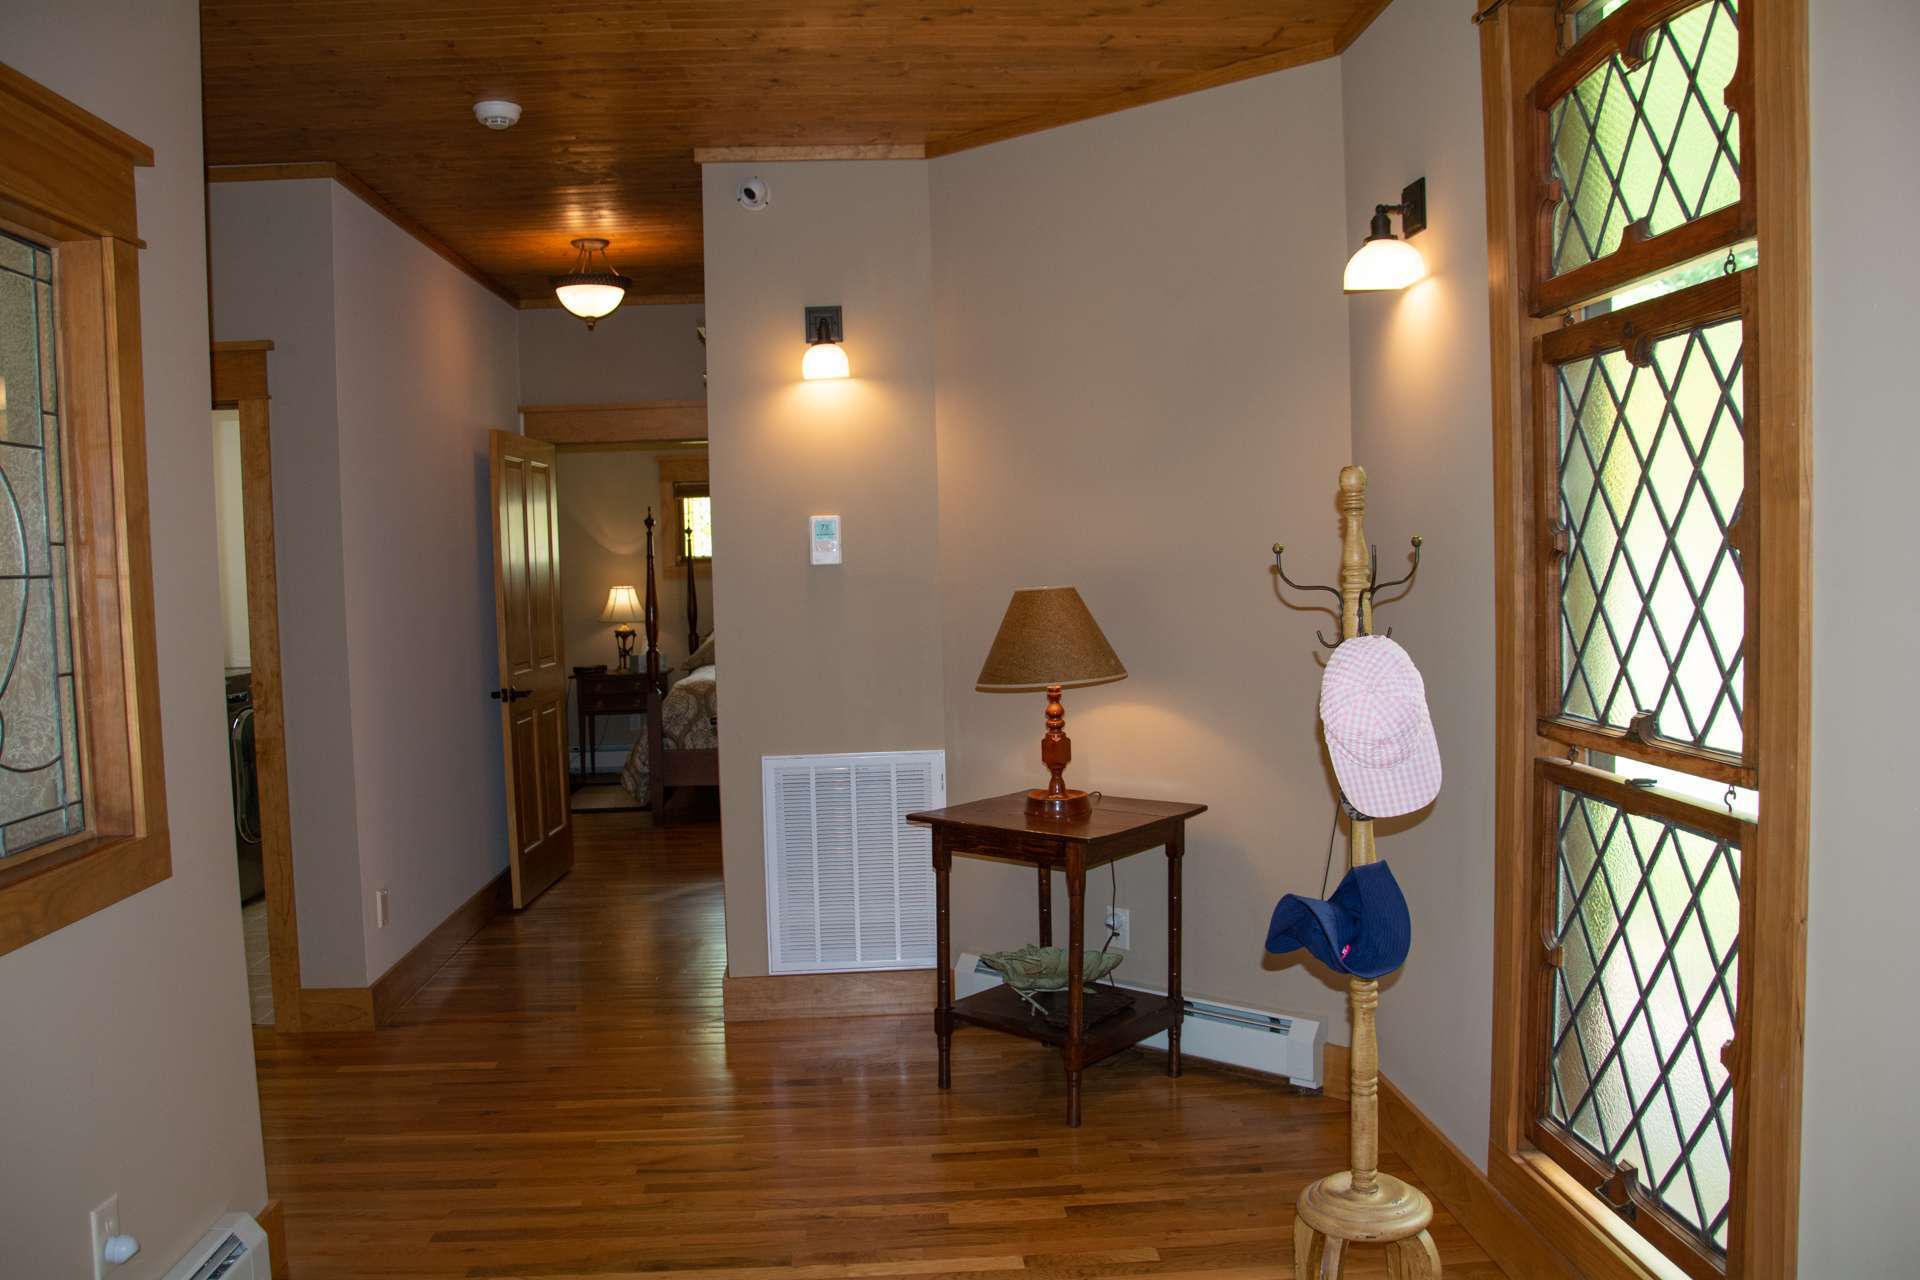 A large foyer welcomes you to come inside and explore the many craftsman details this home has to offer.